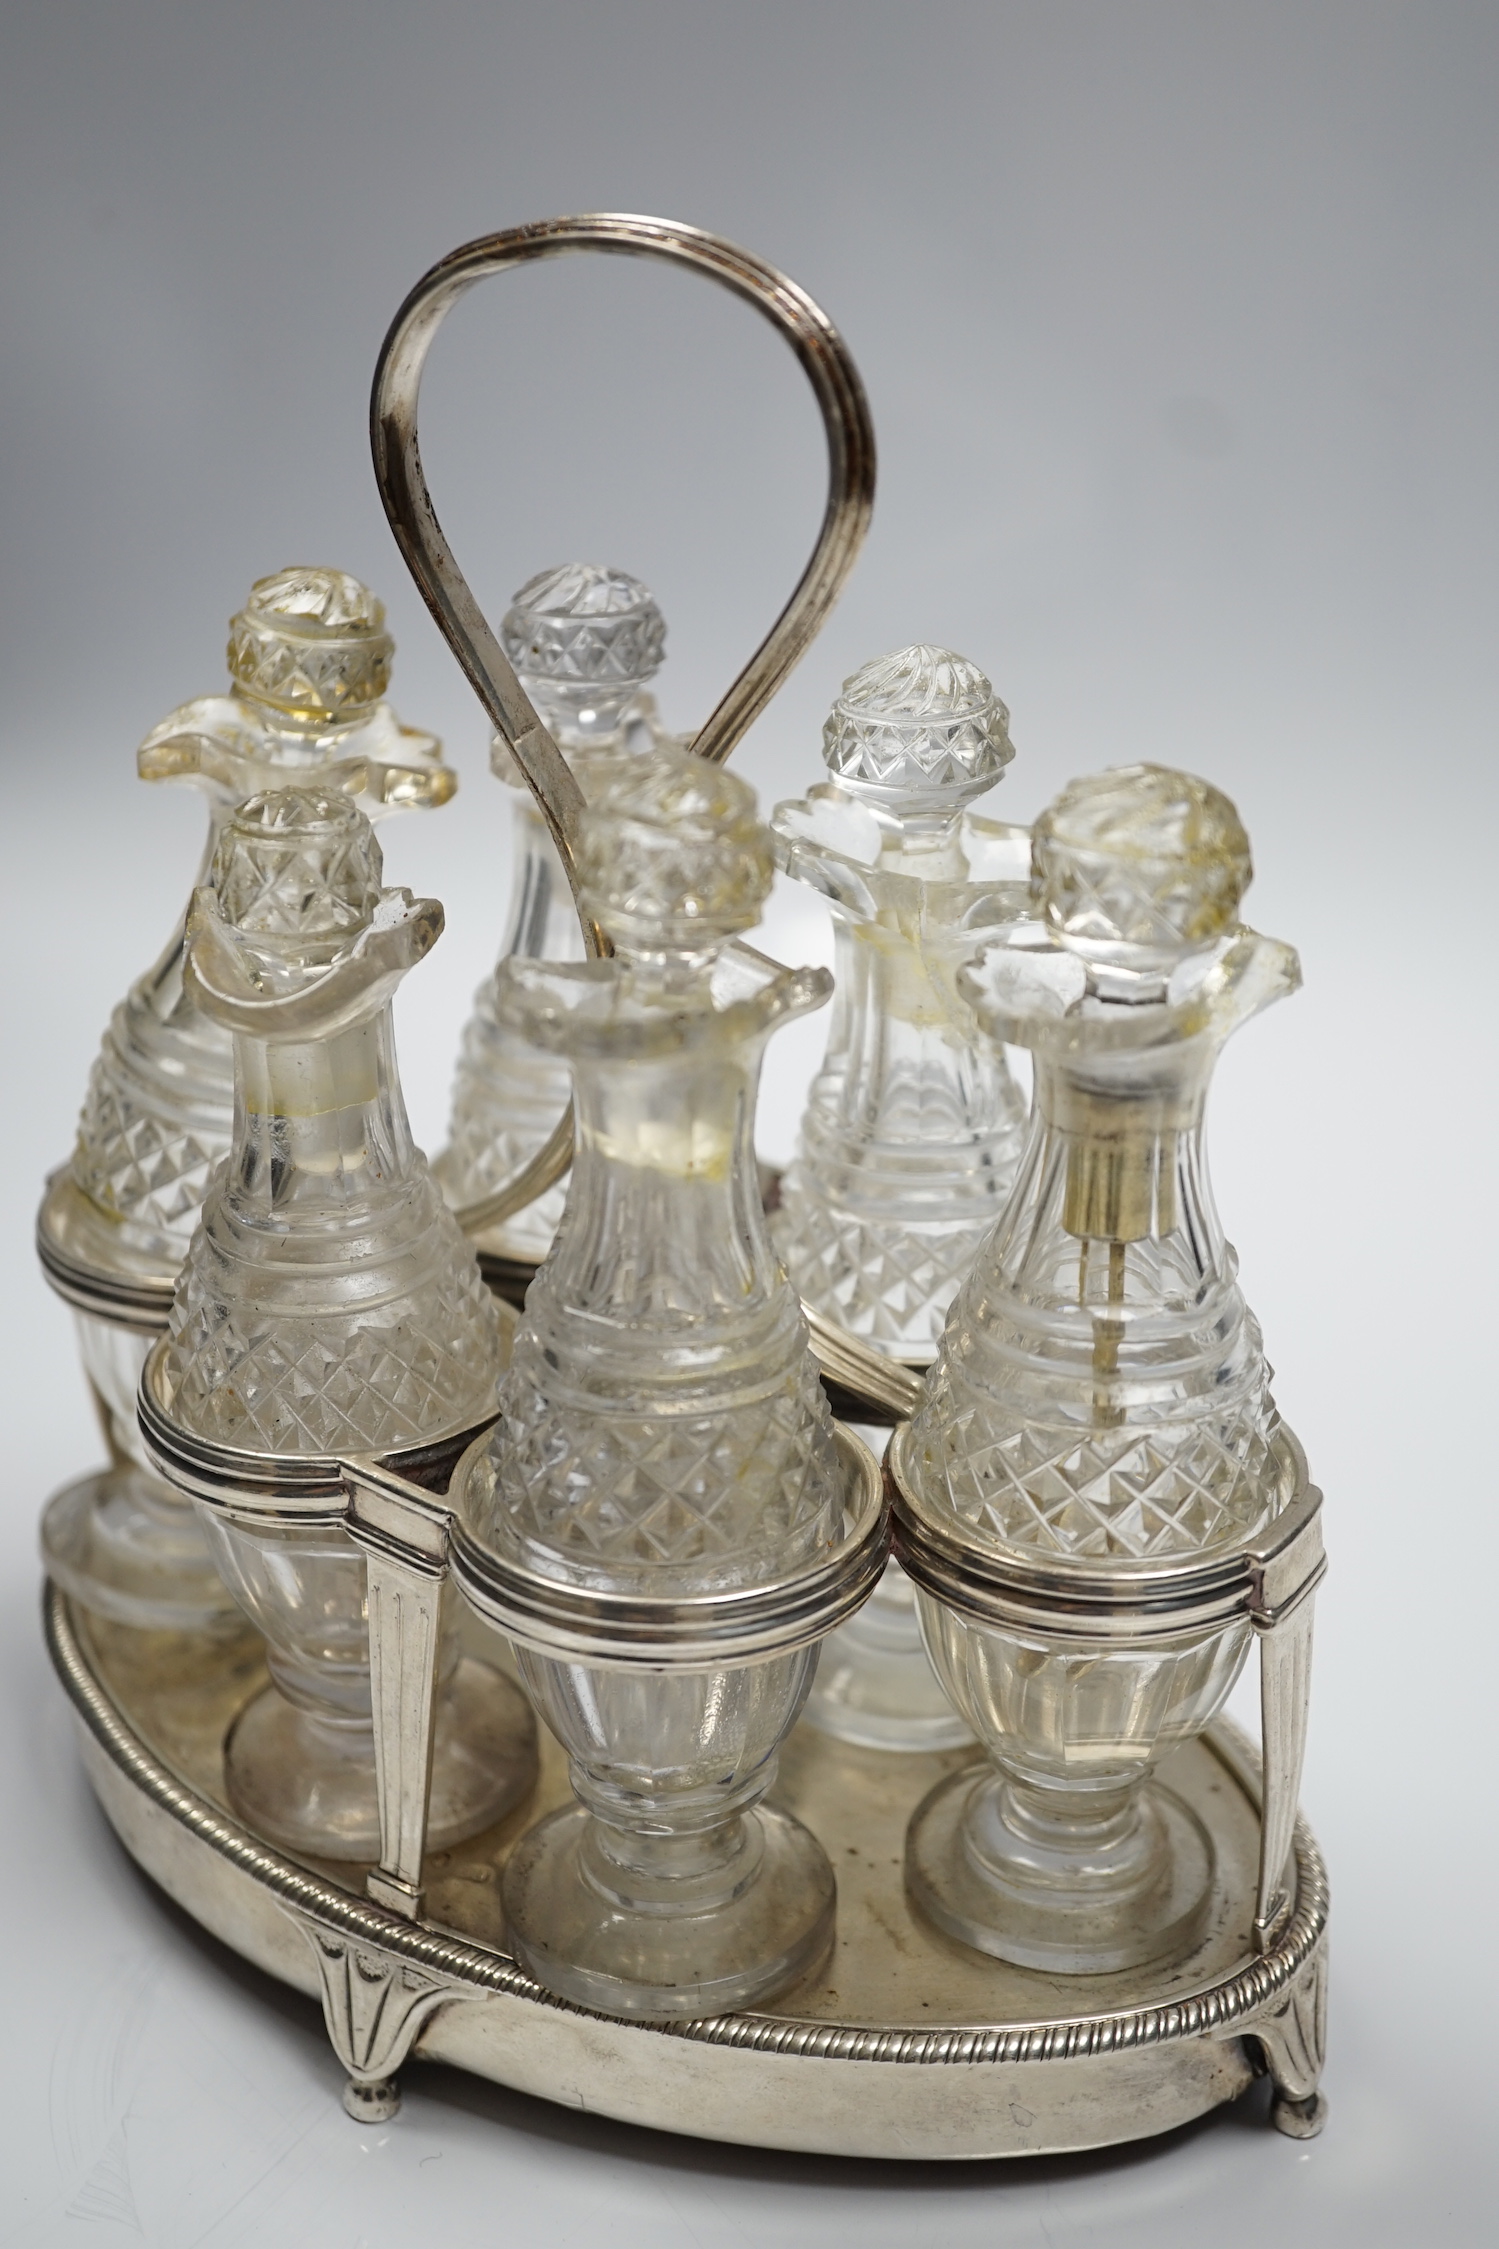 A George III silver mounted oval cruet stand, maker P?, London, 1802, with reeded ring handle and gadrooned border, with six cut glass bottles and stoppers (some damage), height 20cm.